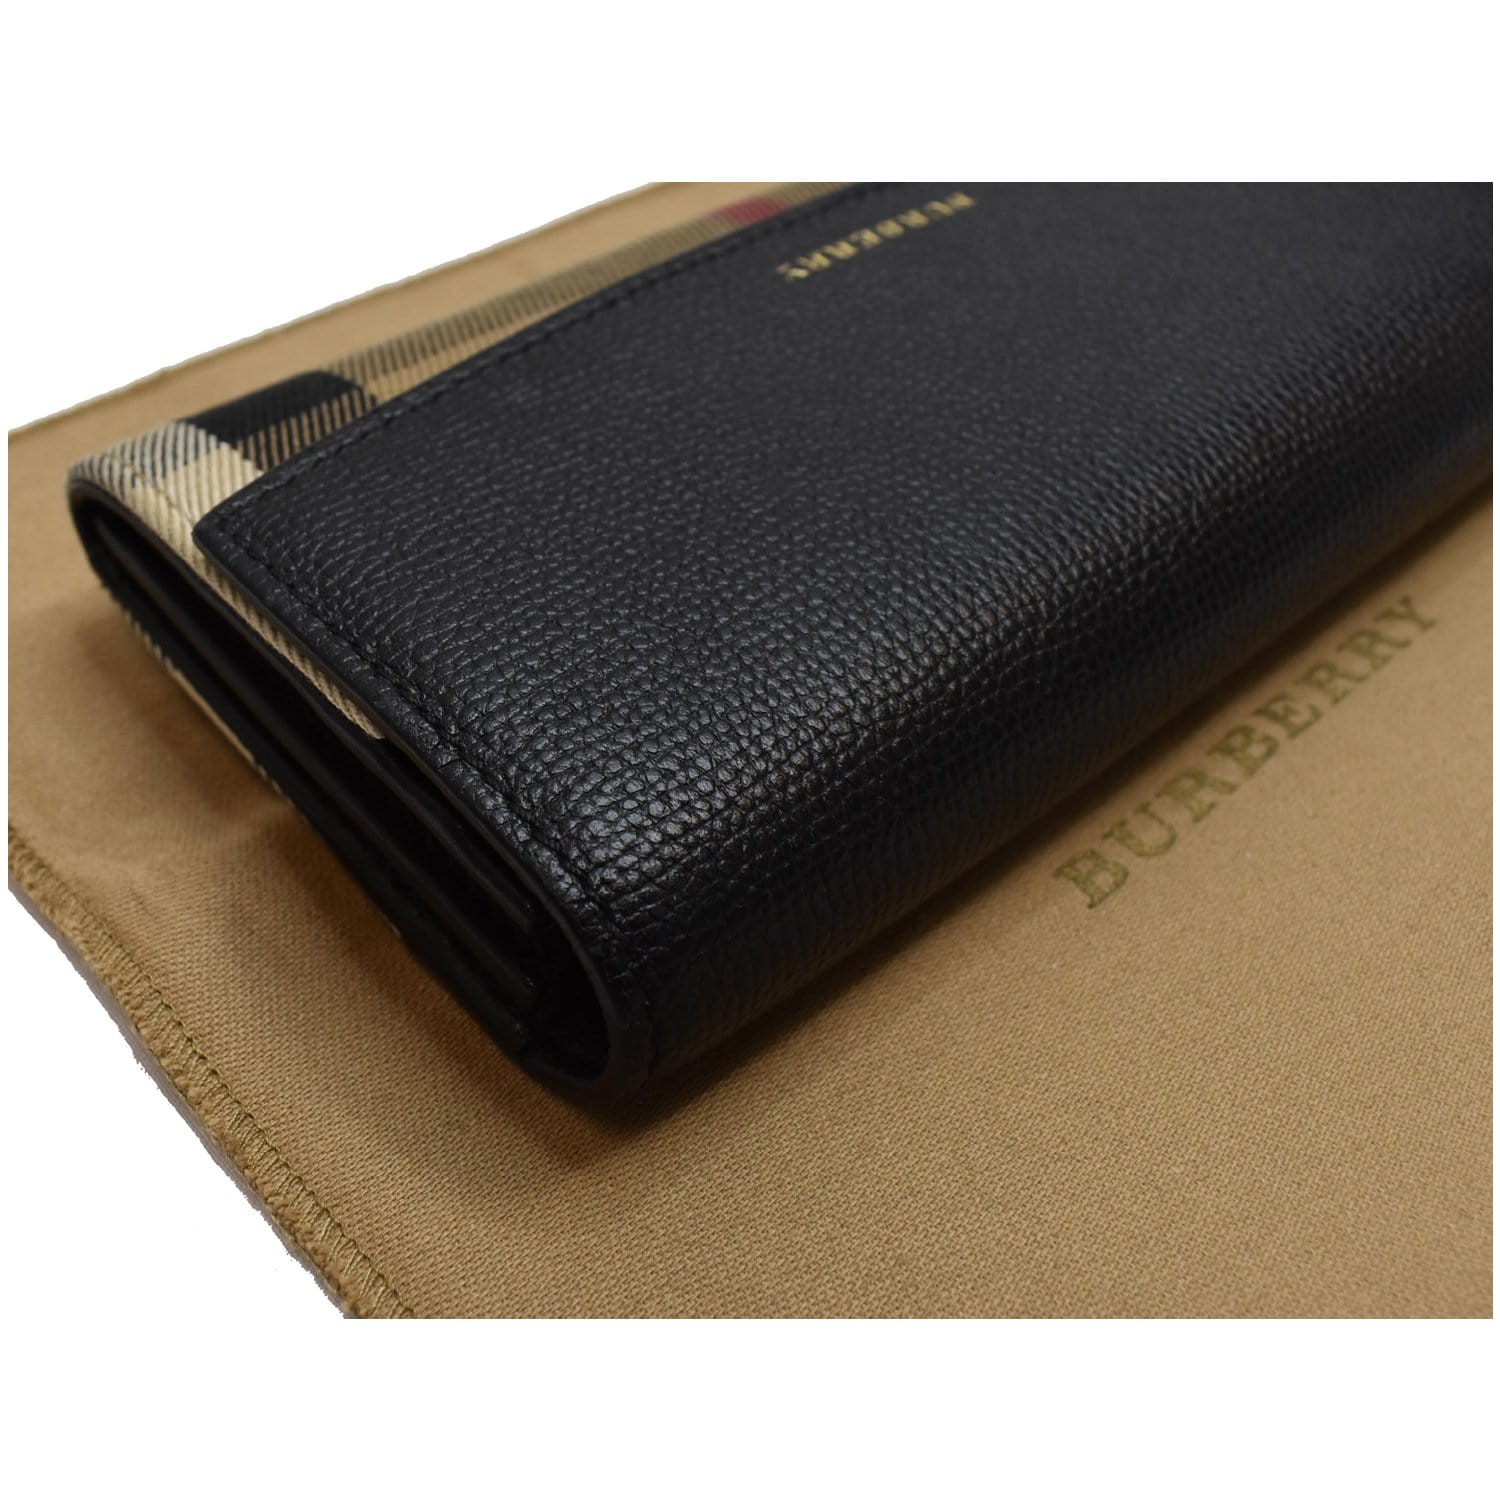 Burberry Leather Printed Wallet